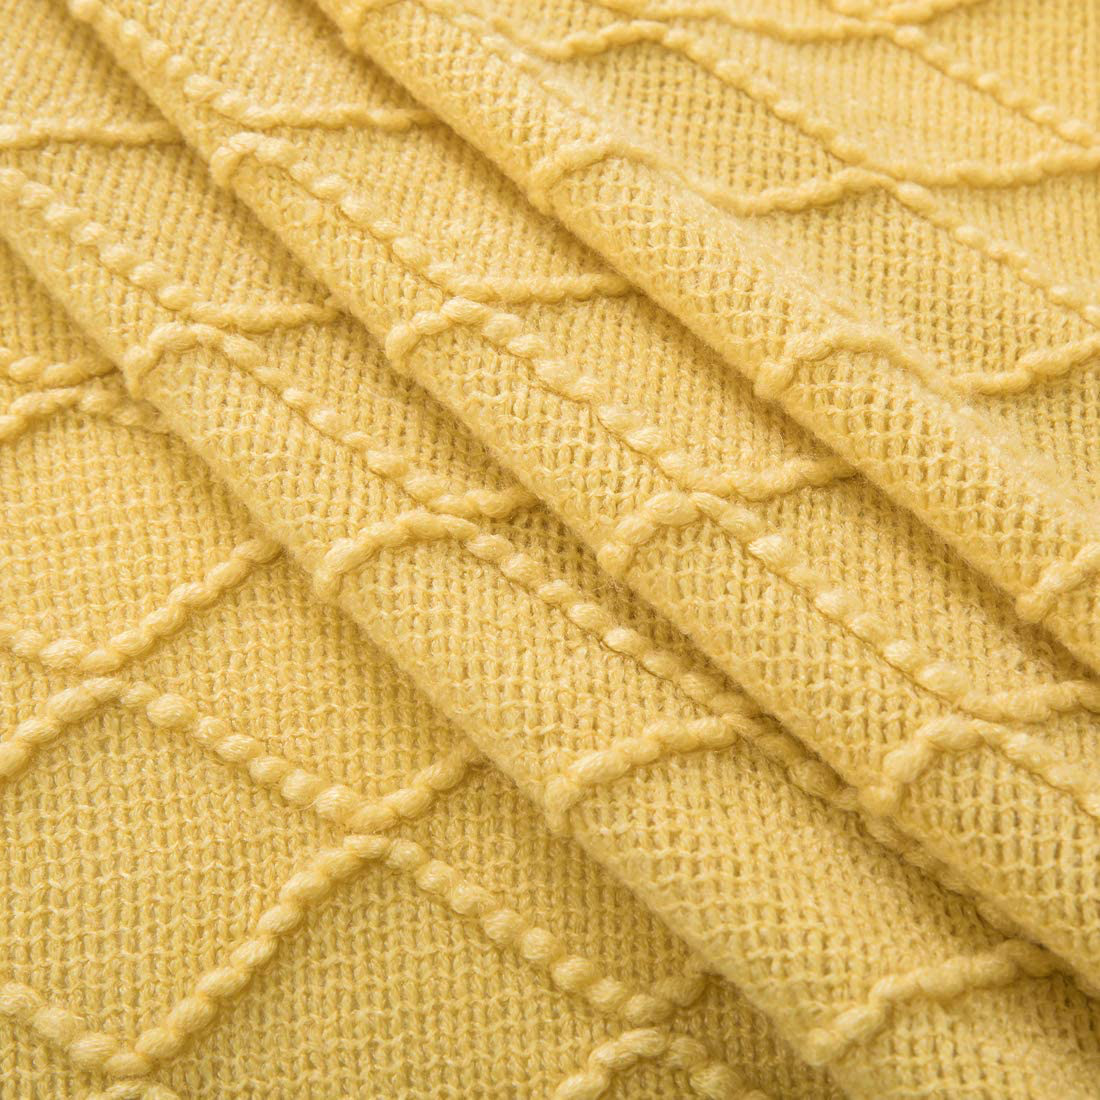 Revdomfly Mustard Yellow Throw Blanket with Fringe Decorative Farmhouse Knitted Throw Blanket for Sofa Couch Bed, 50" x 67", Yellow